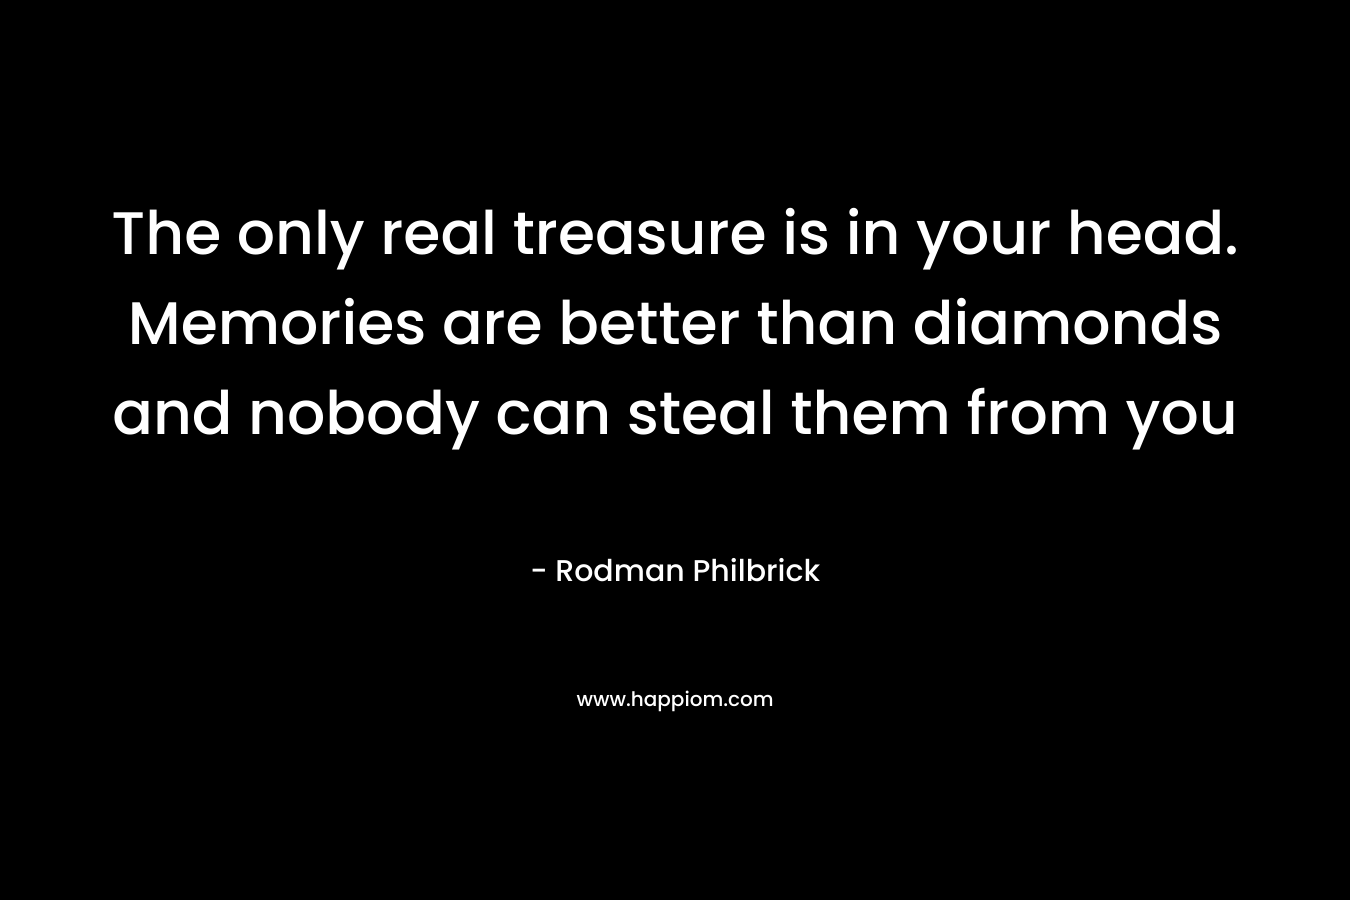 The only real treasure is in your head. Memories are better than diamonds and nobody can steal them from you – Rodman Philbrick